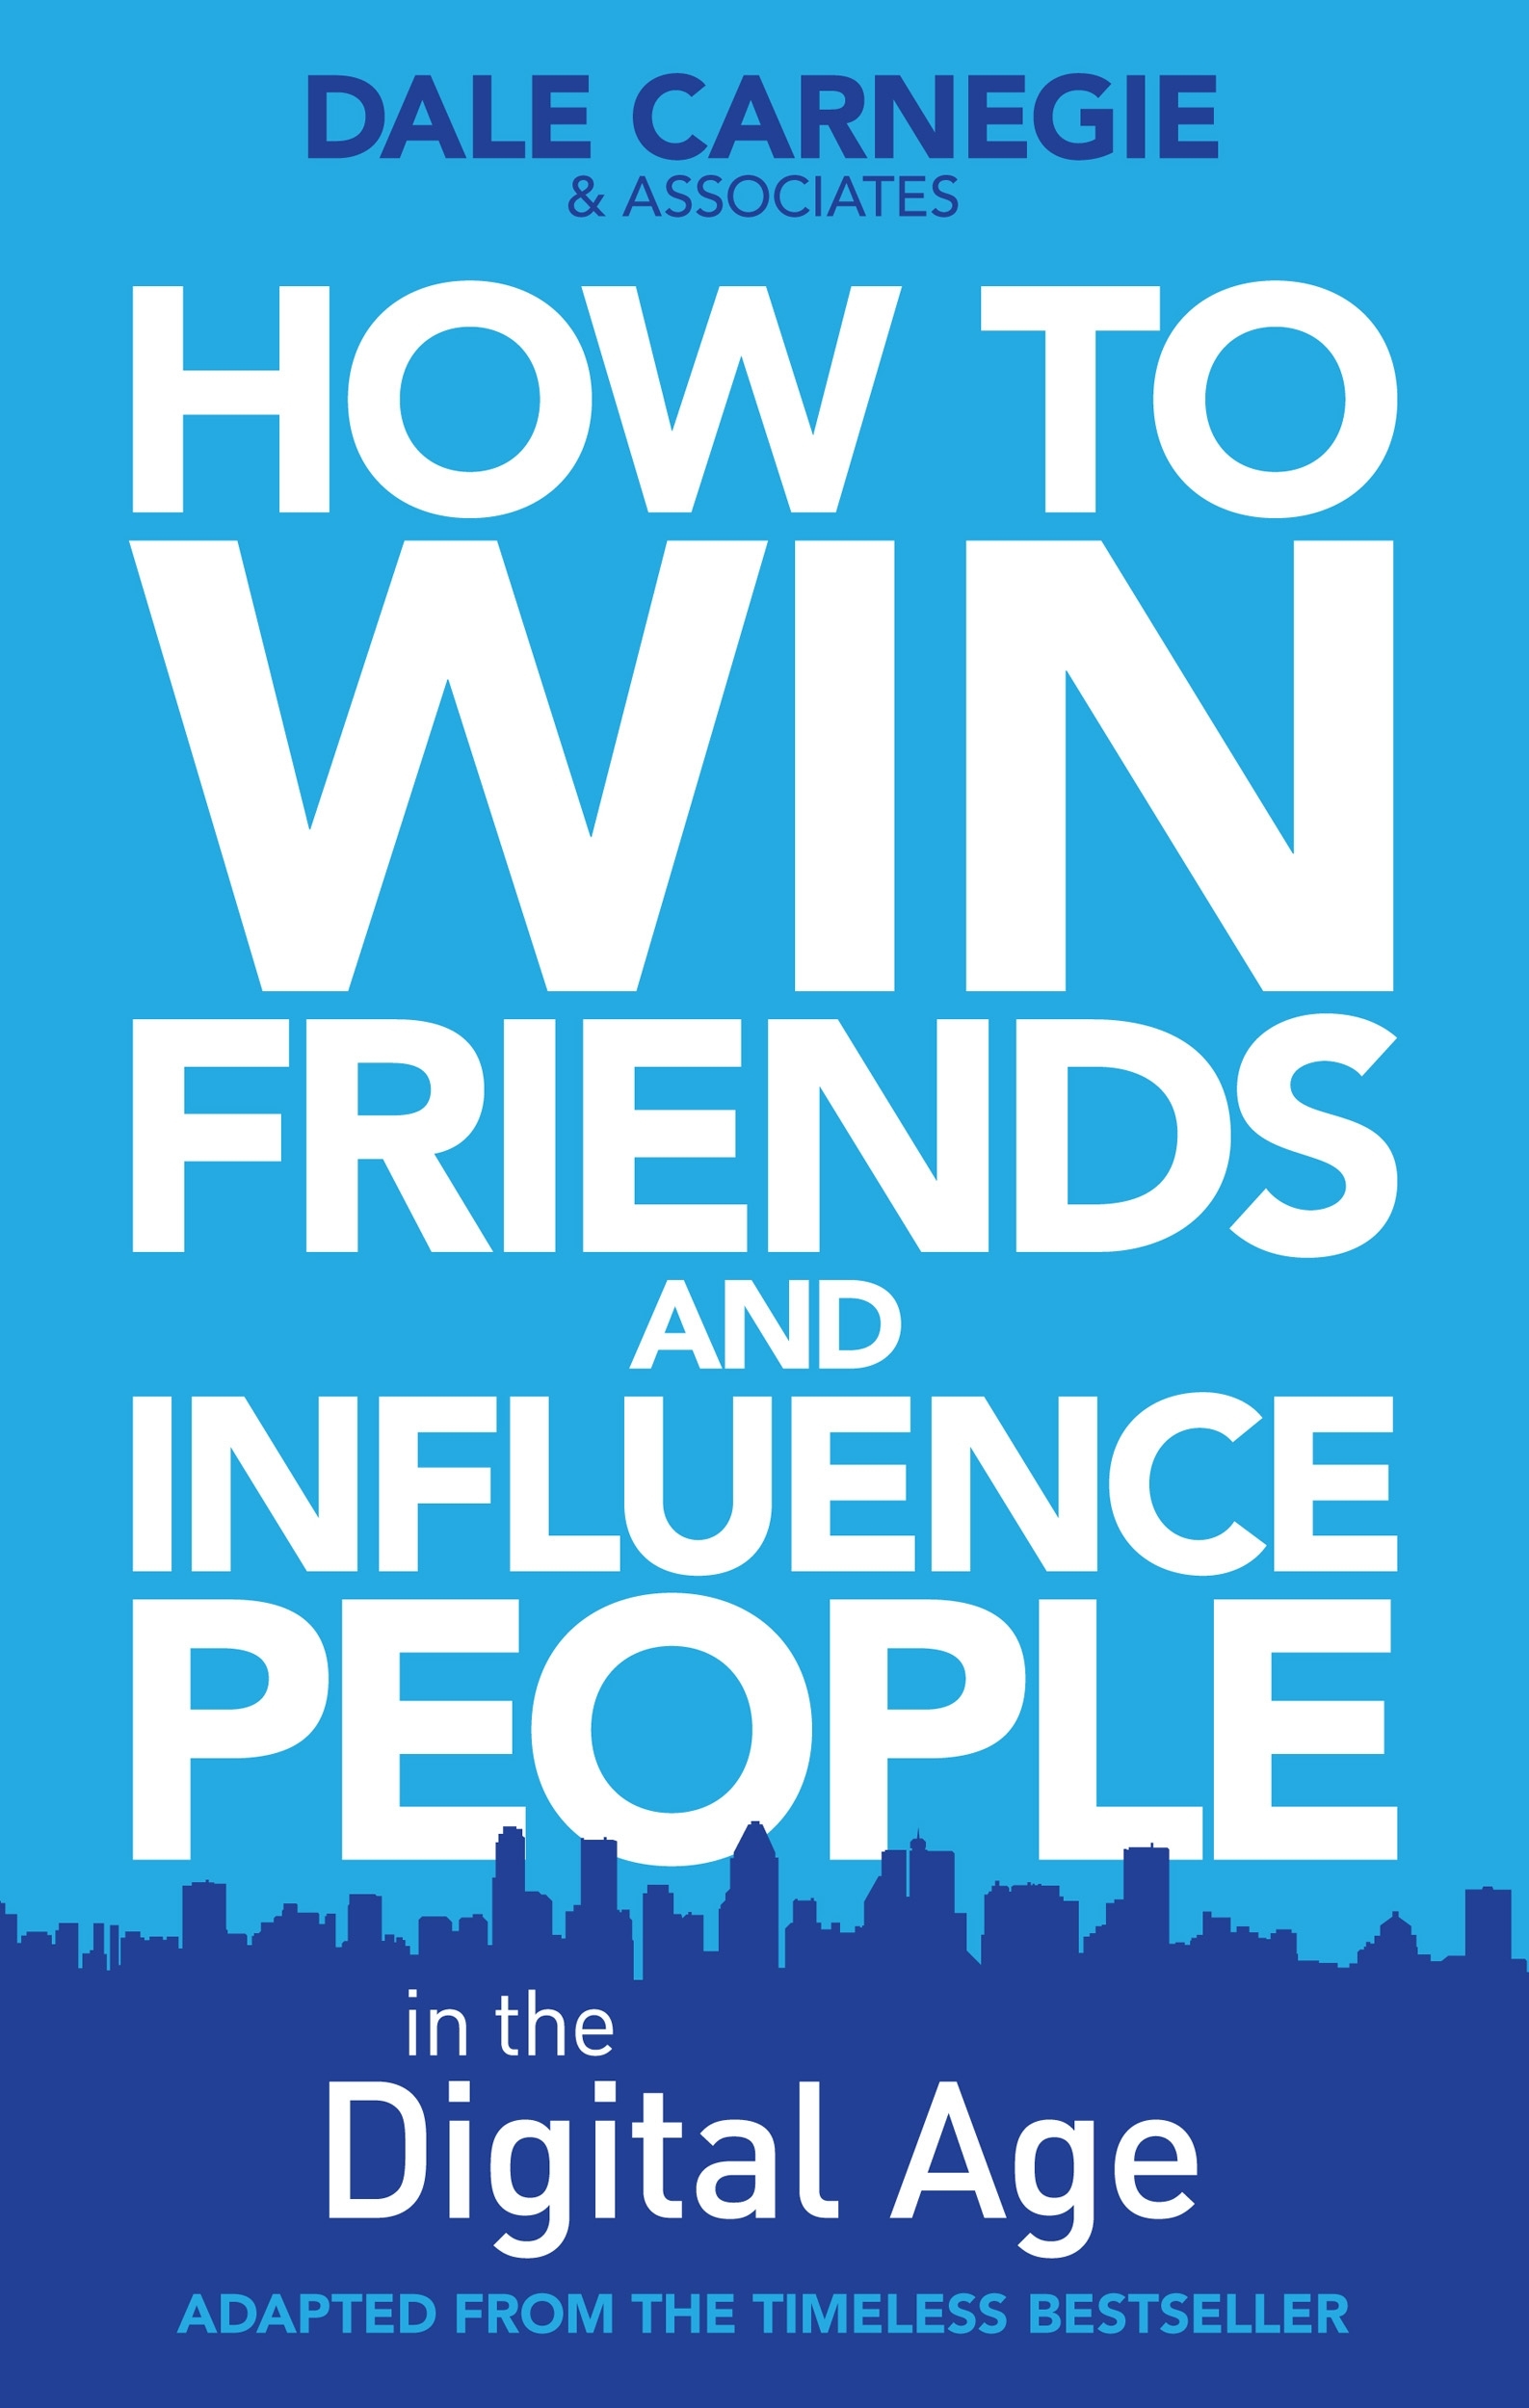 How To Win Friends and Influence People” by Dale Carnegie